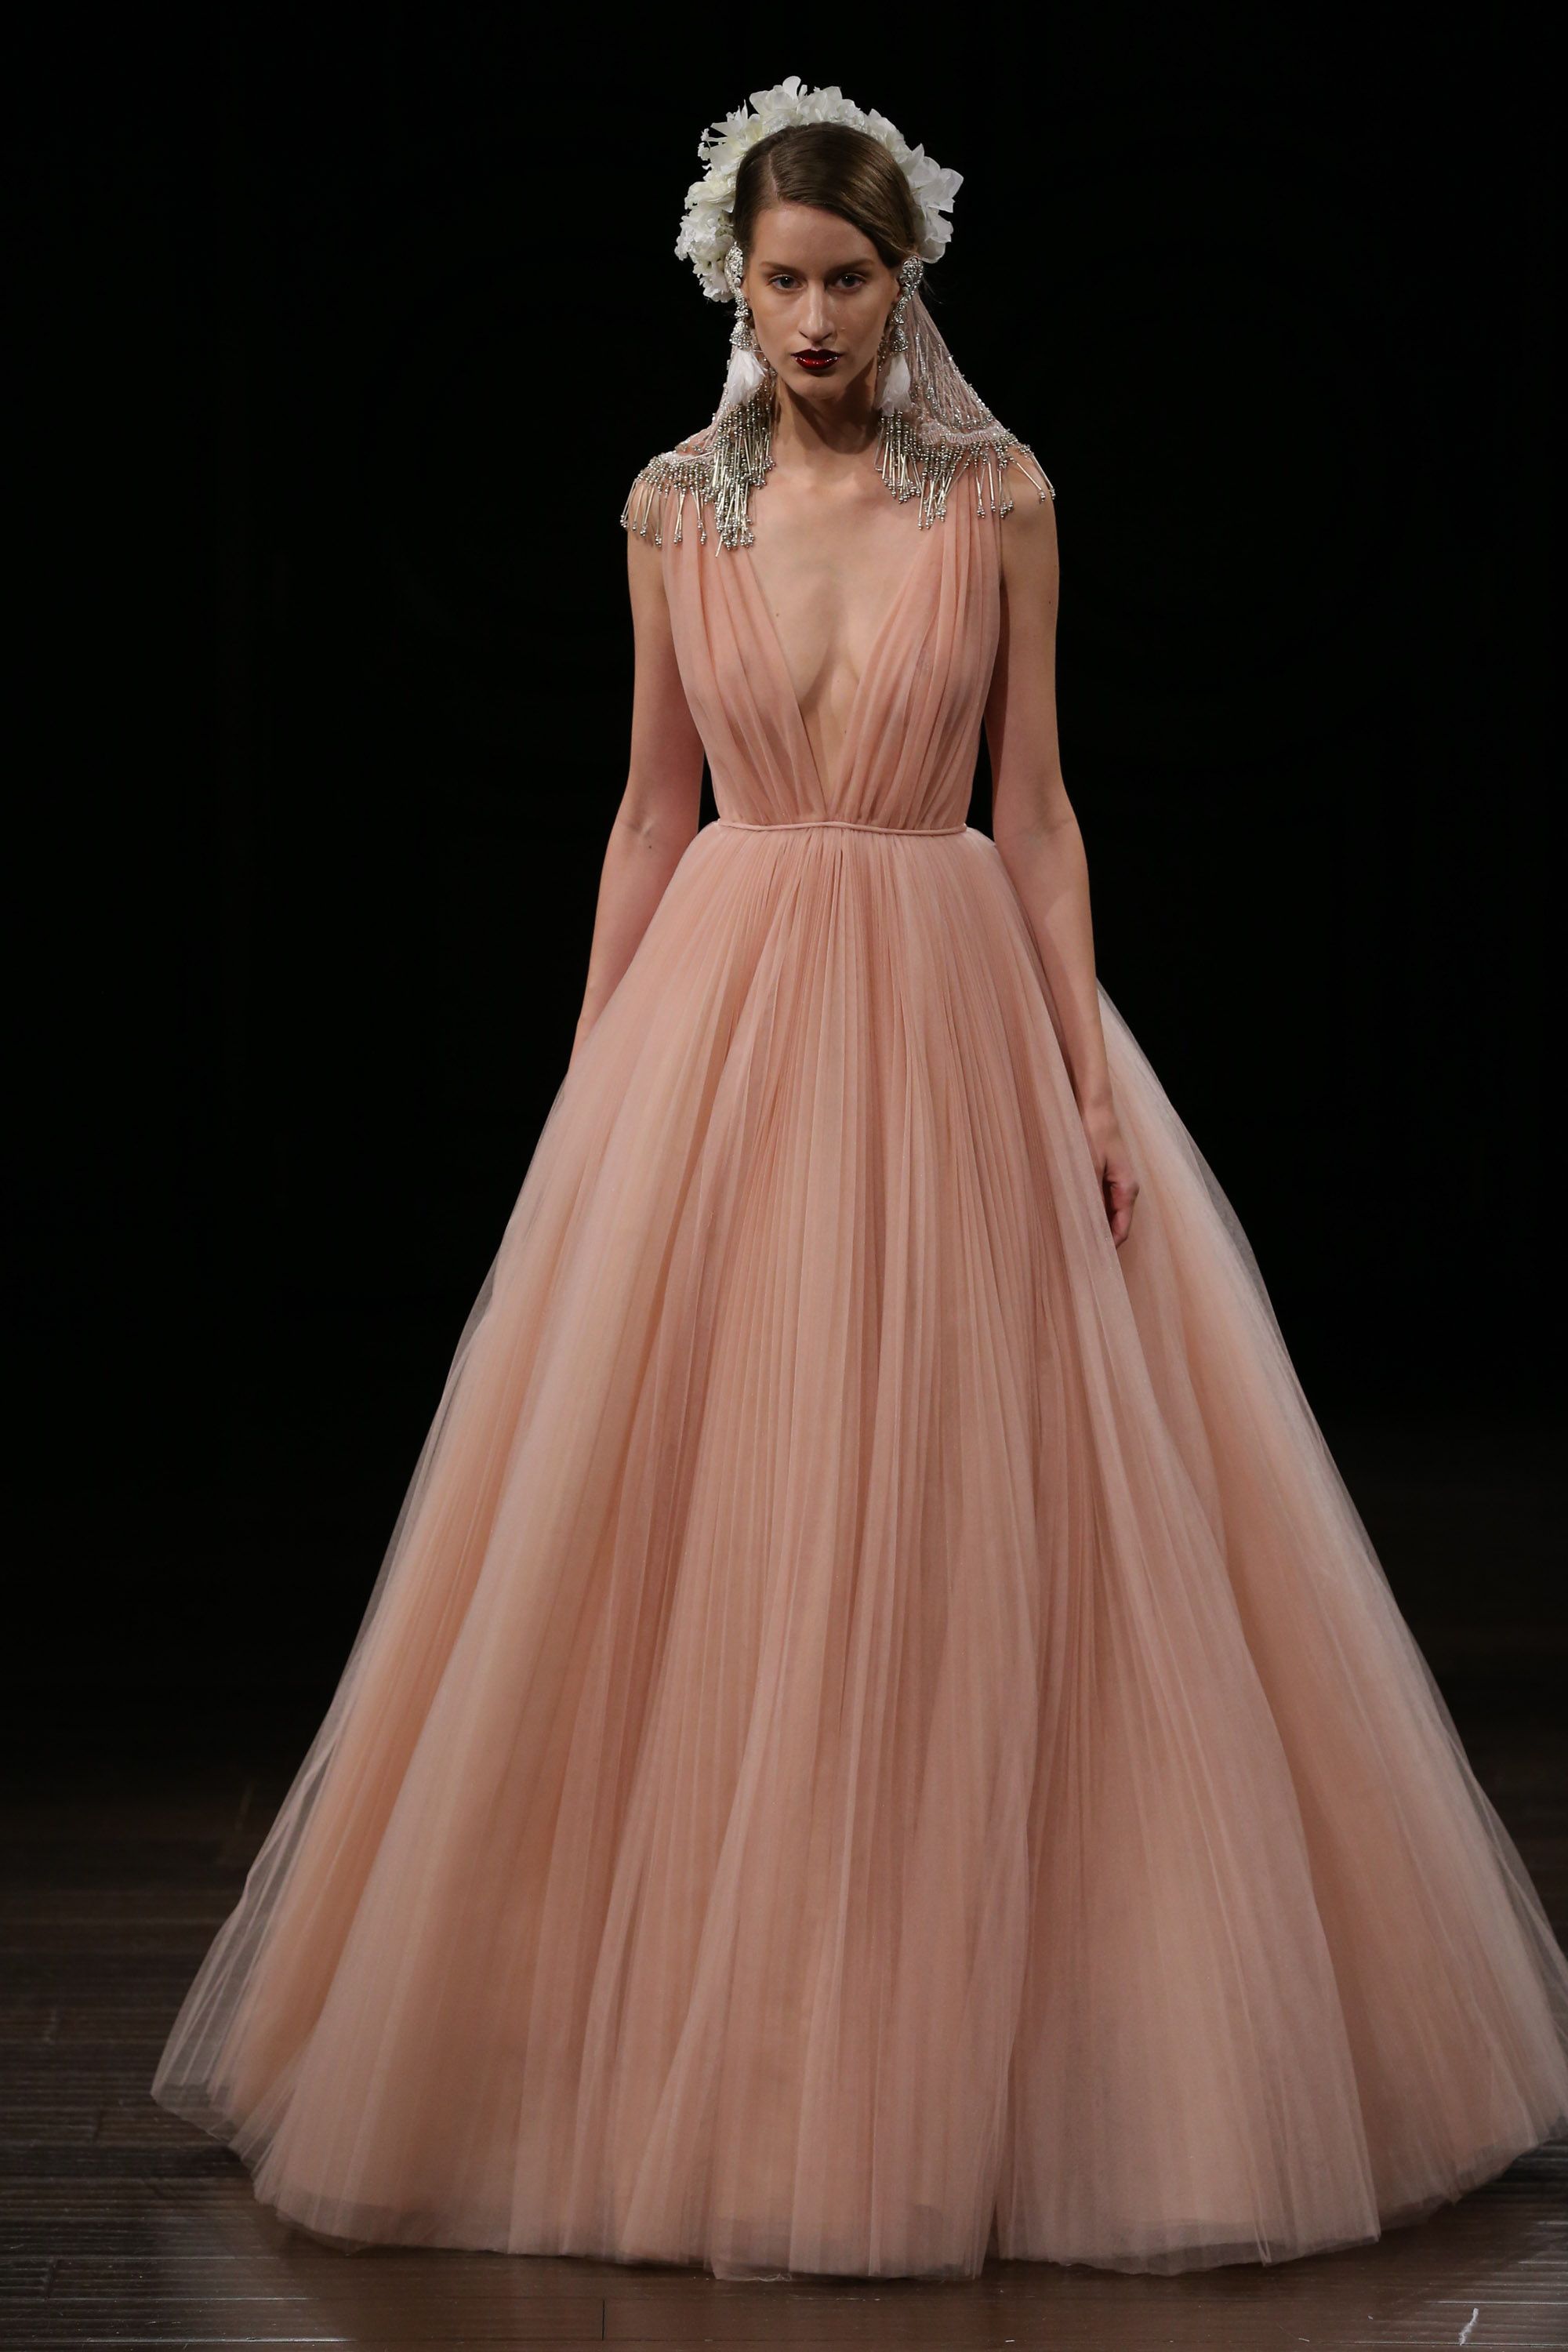 Latest Gown designs -Storyvogue.com | Simple gowns, Fancy dresses long,  Simple frocks